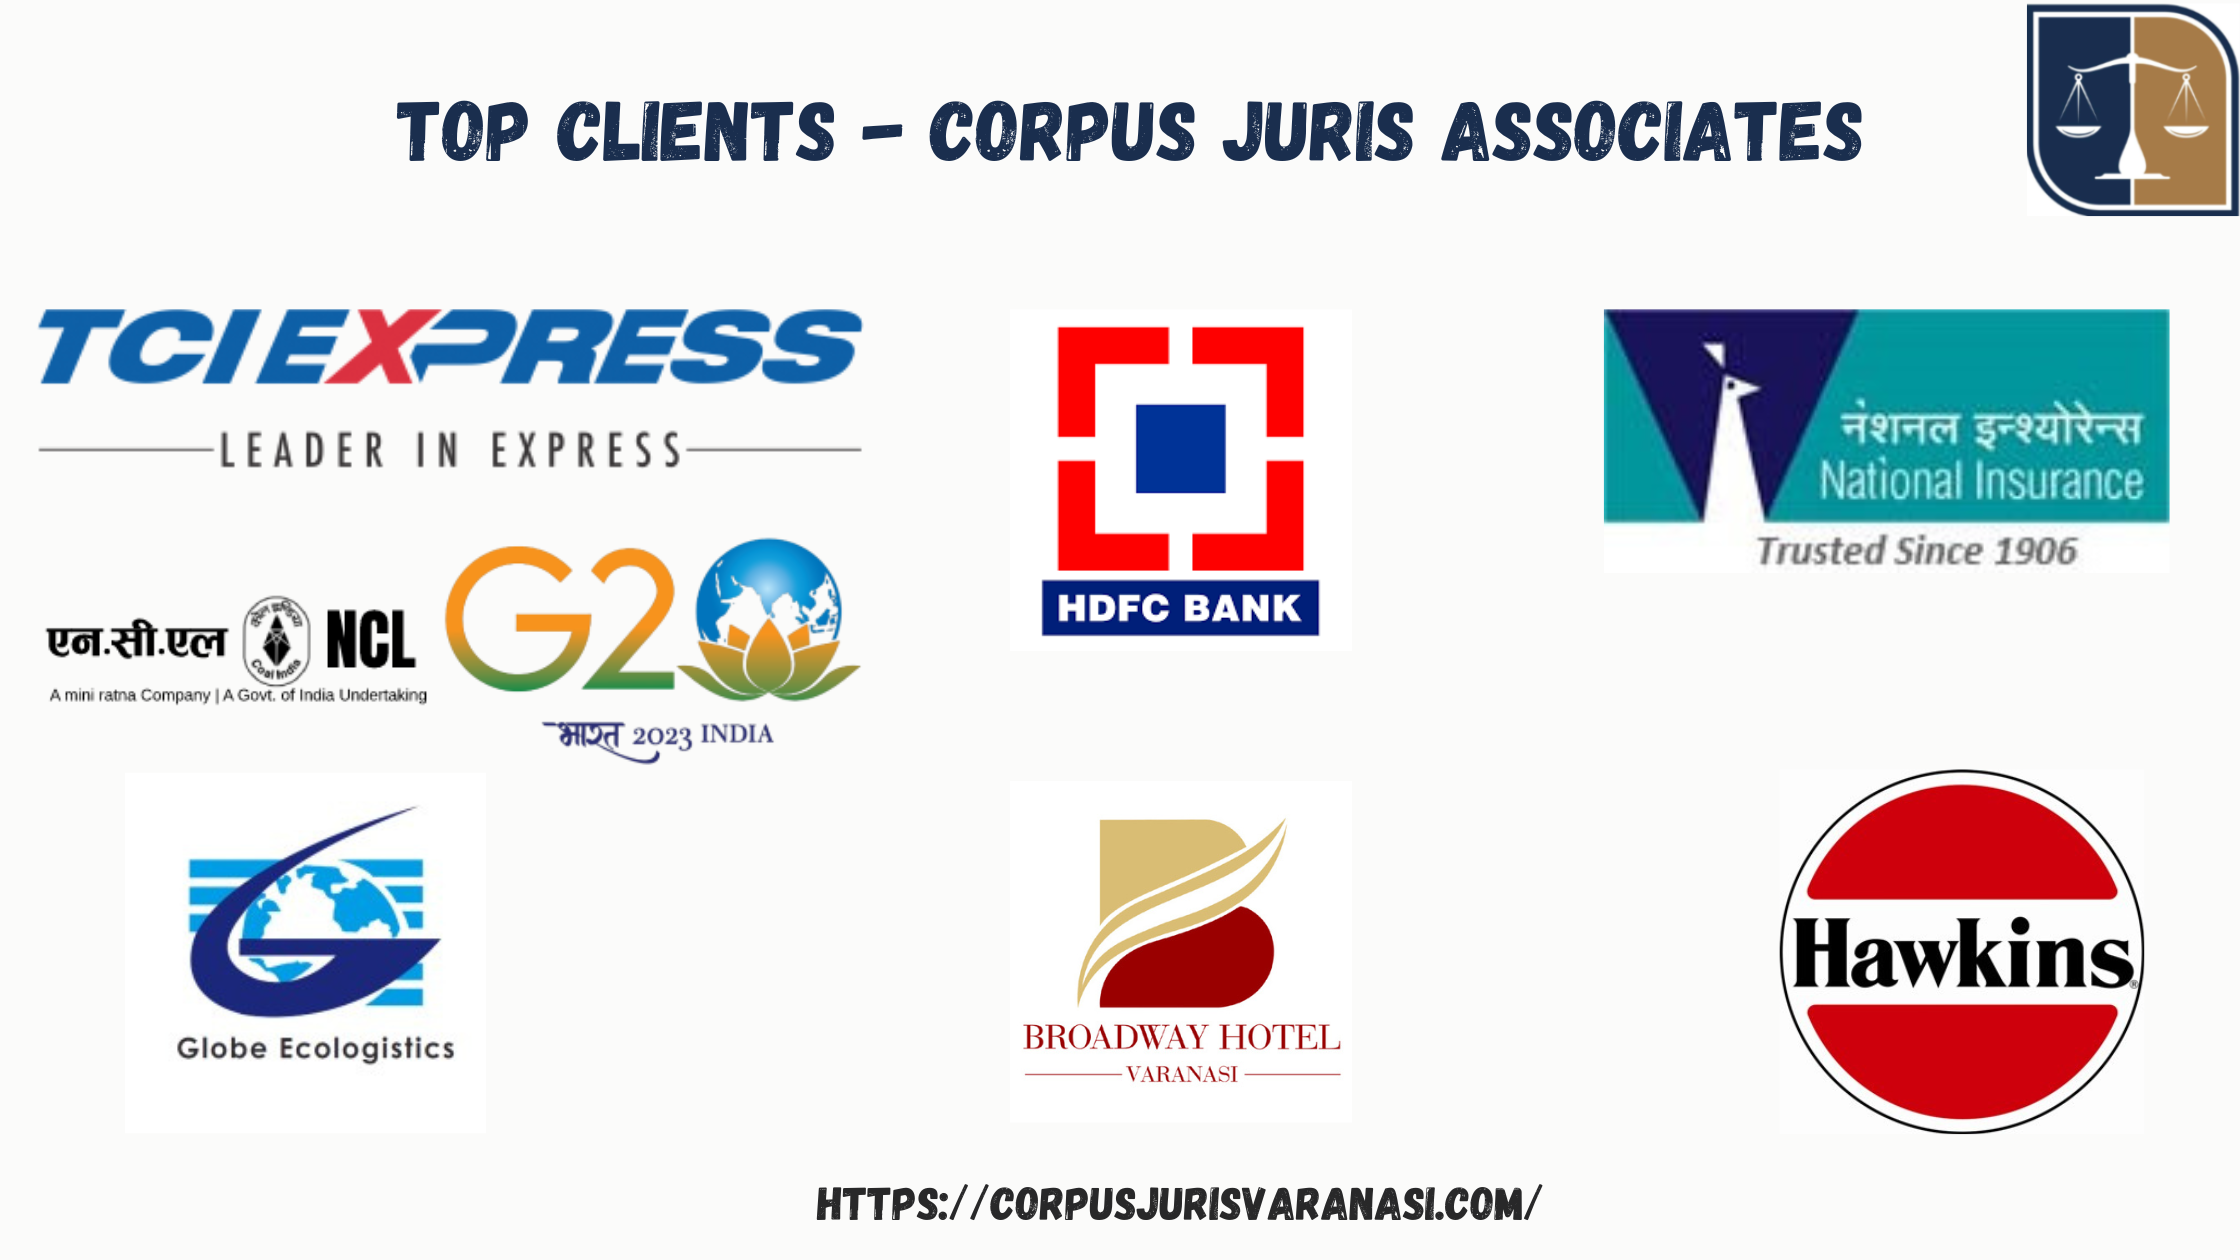 Our Esteemed Clients: A Testament to Our Legal Expertise